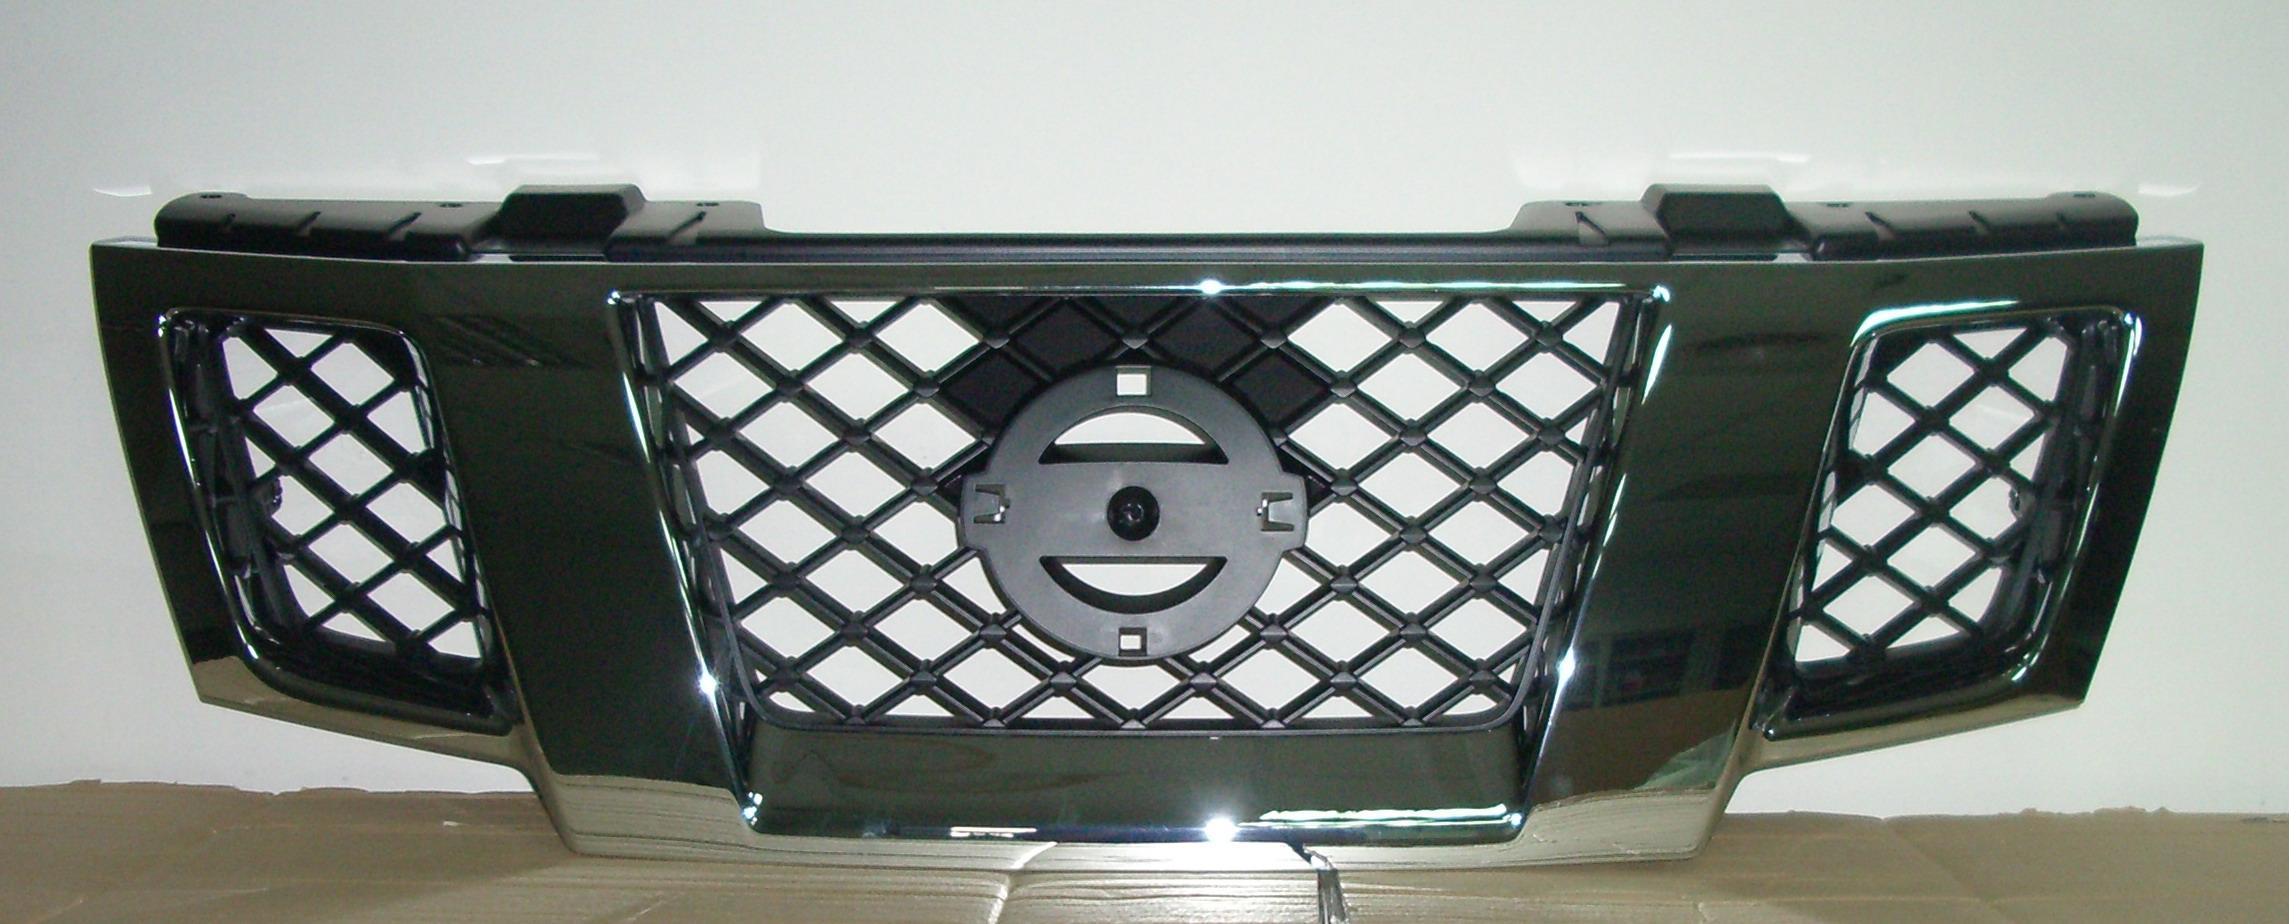 FRONTIER 09-17 Grille Chrome/Black With Chrome FRAME